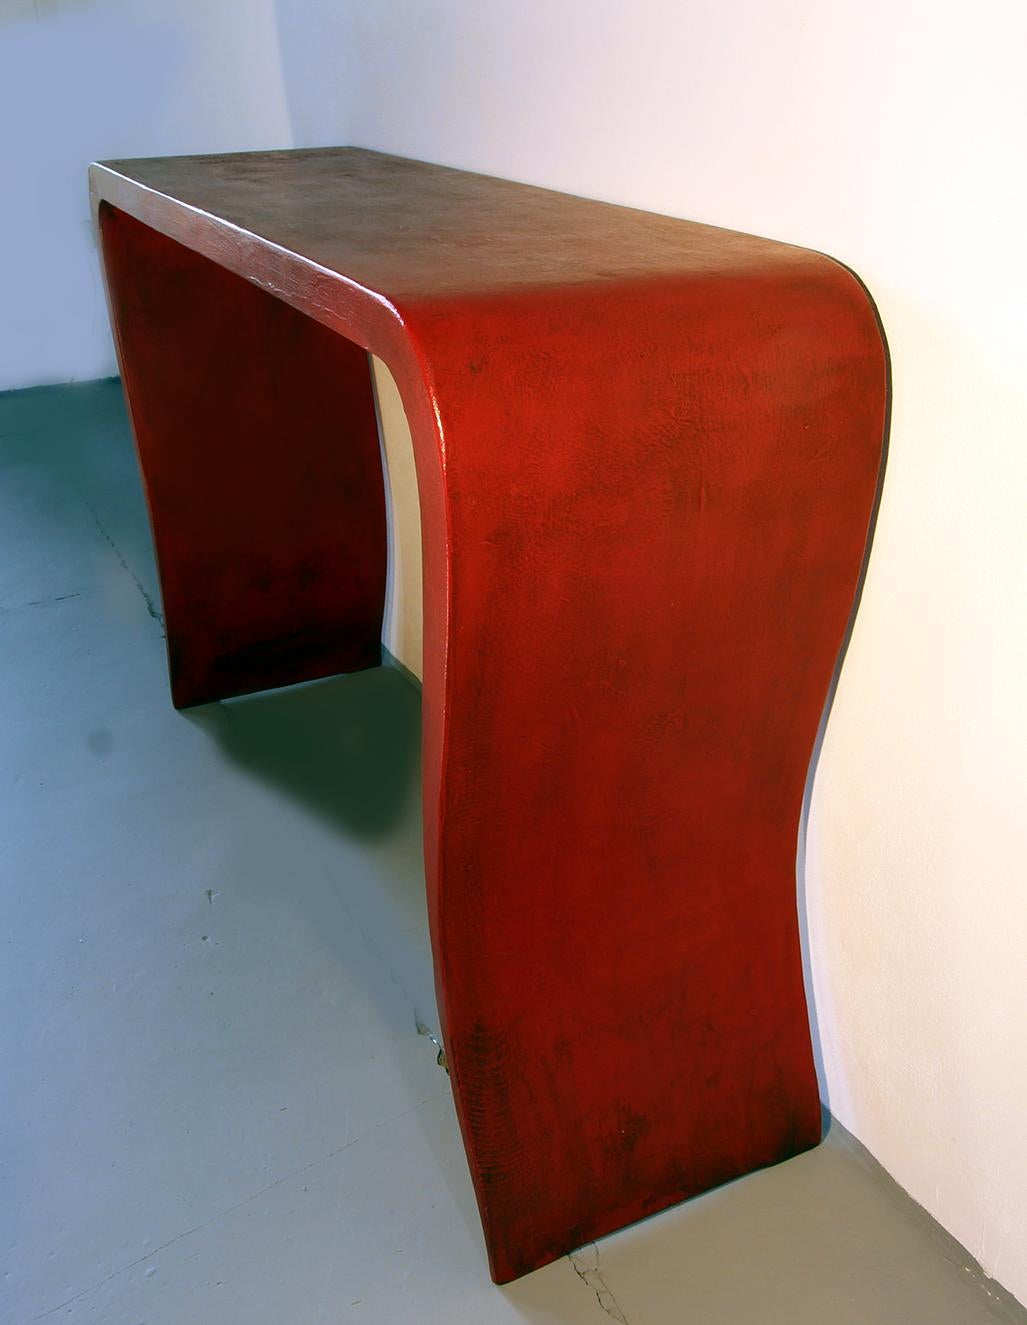 Special silhouette of this shaped console in china red lacquer in solid wood.